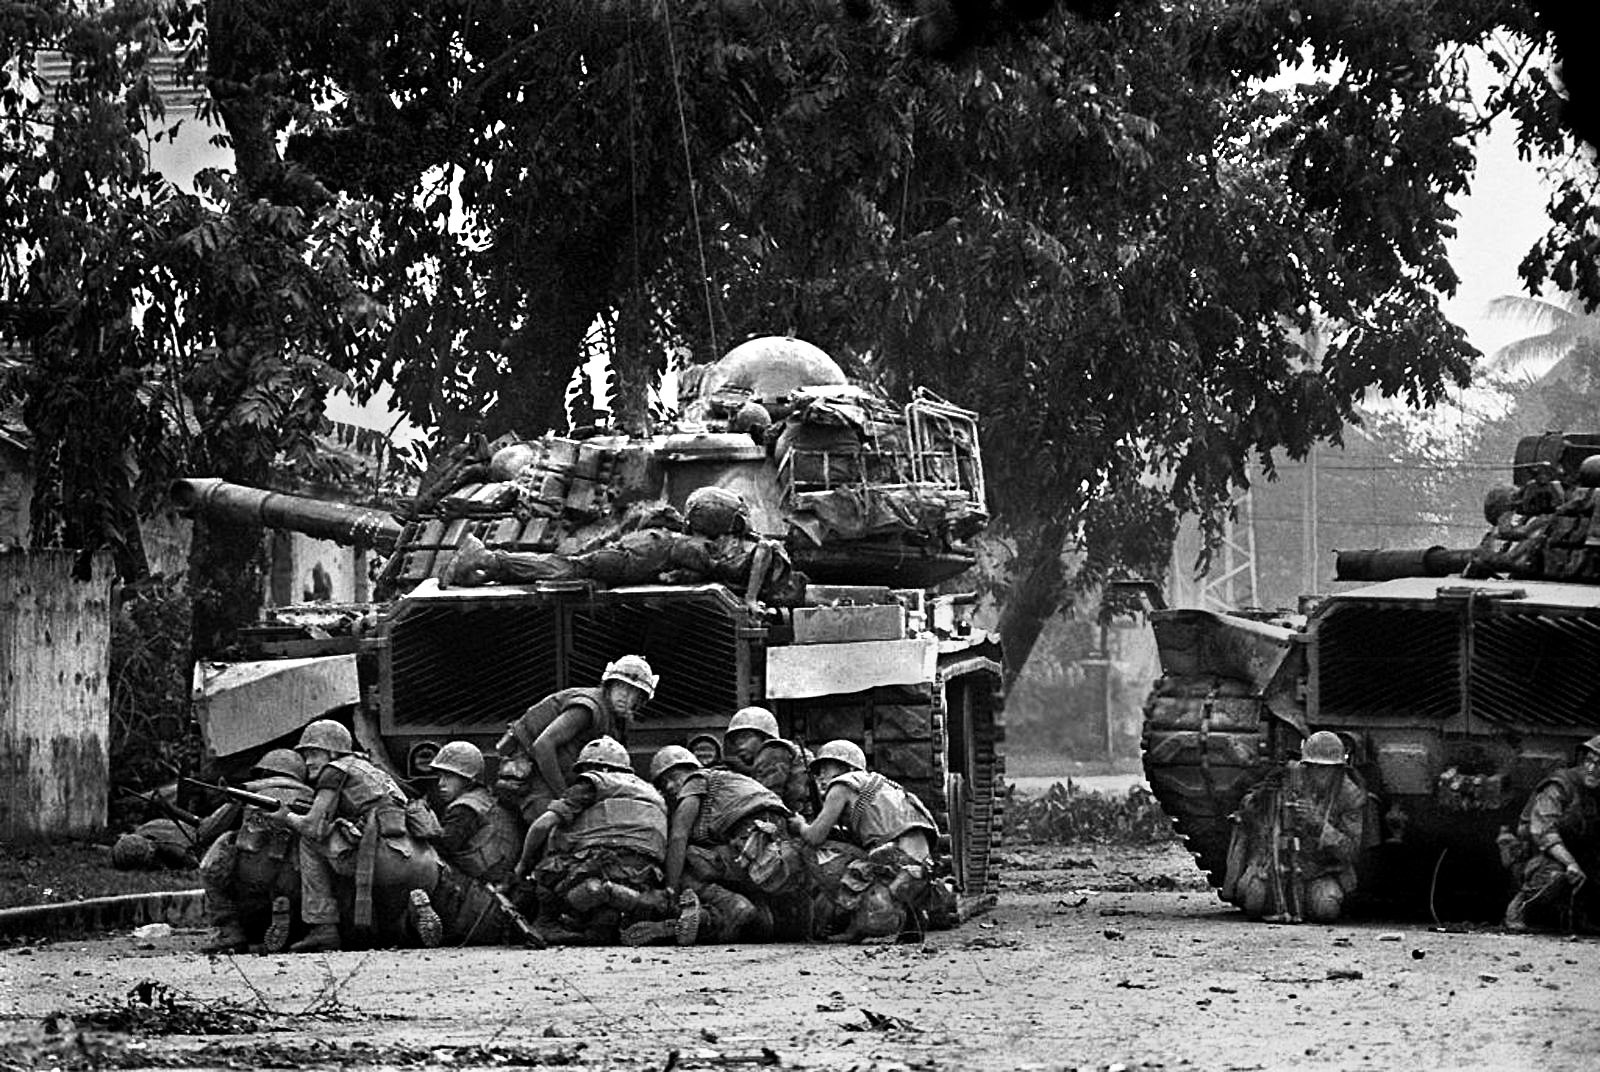 A Patton tank fires on a North Vietnamese position as Marines take cover from an enemy sniper. 